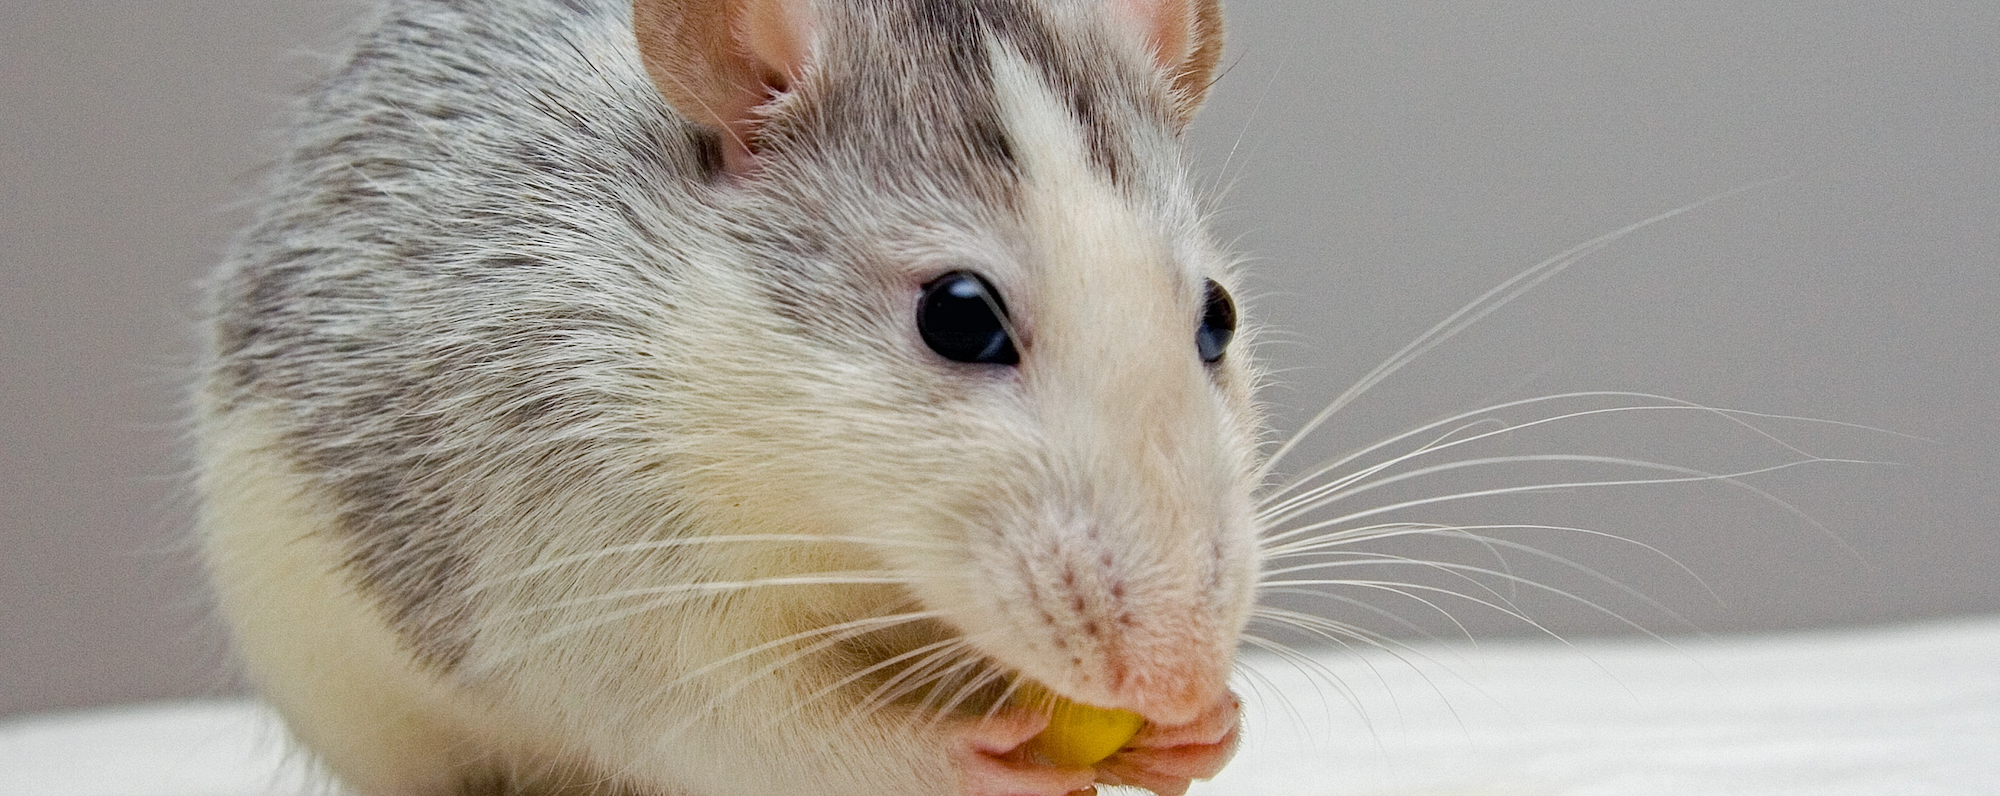 Knowing What To Feed Your Pet Rats And Mice Hartz,Learn How To Crochet Online